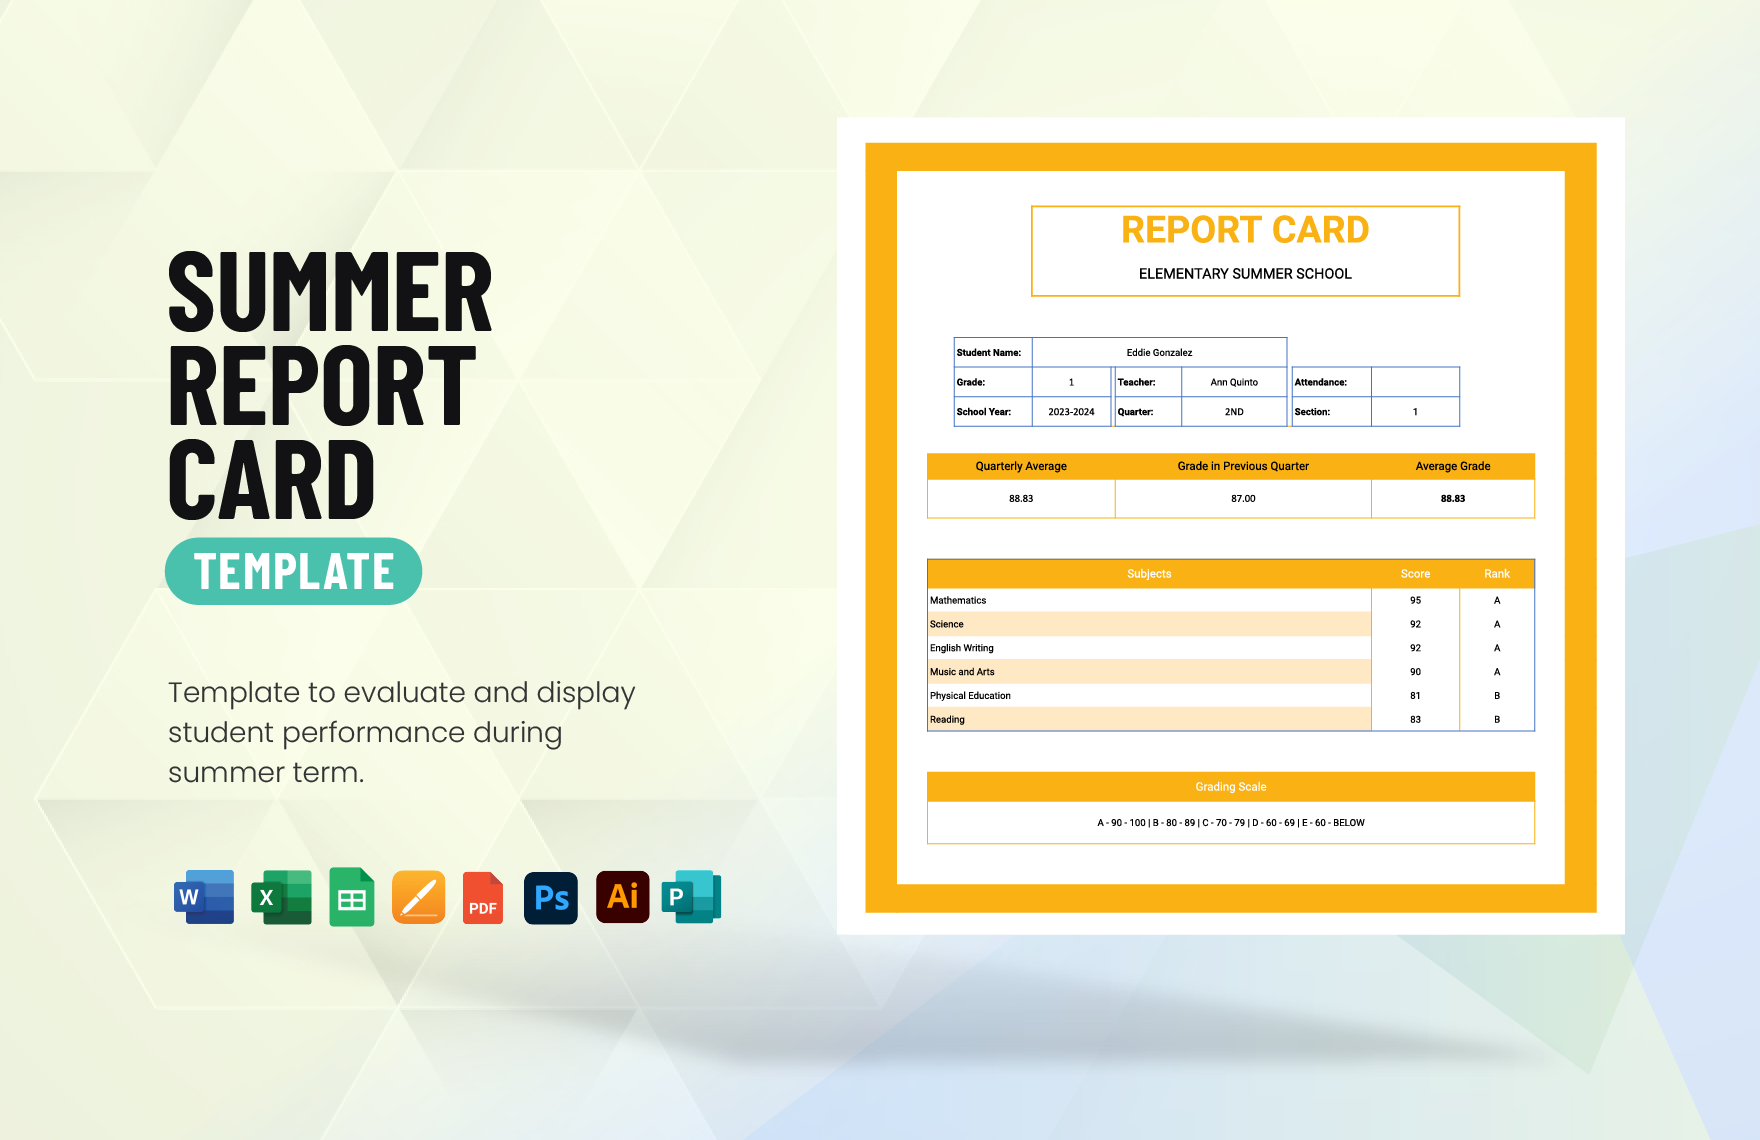 Summer Report Card Template in Word, Excel, PDF, Google Sheets, Illustrator, PSD, Apple Pages, Publisher